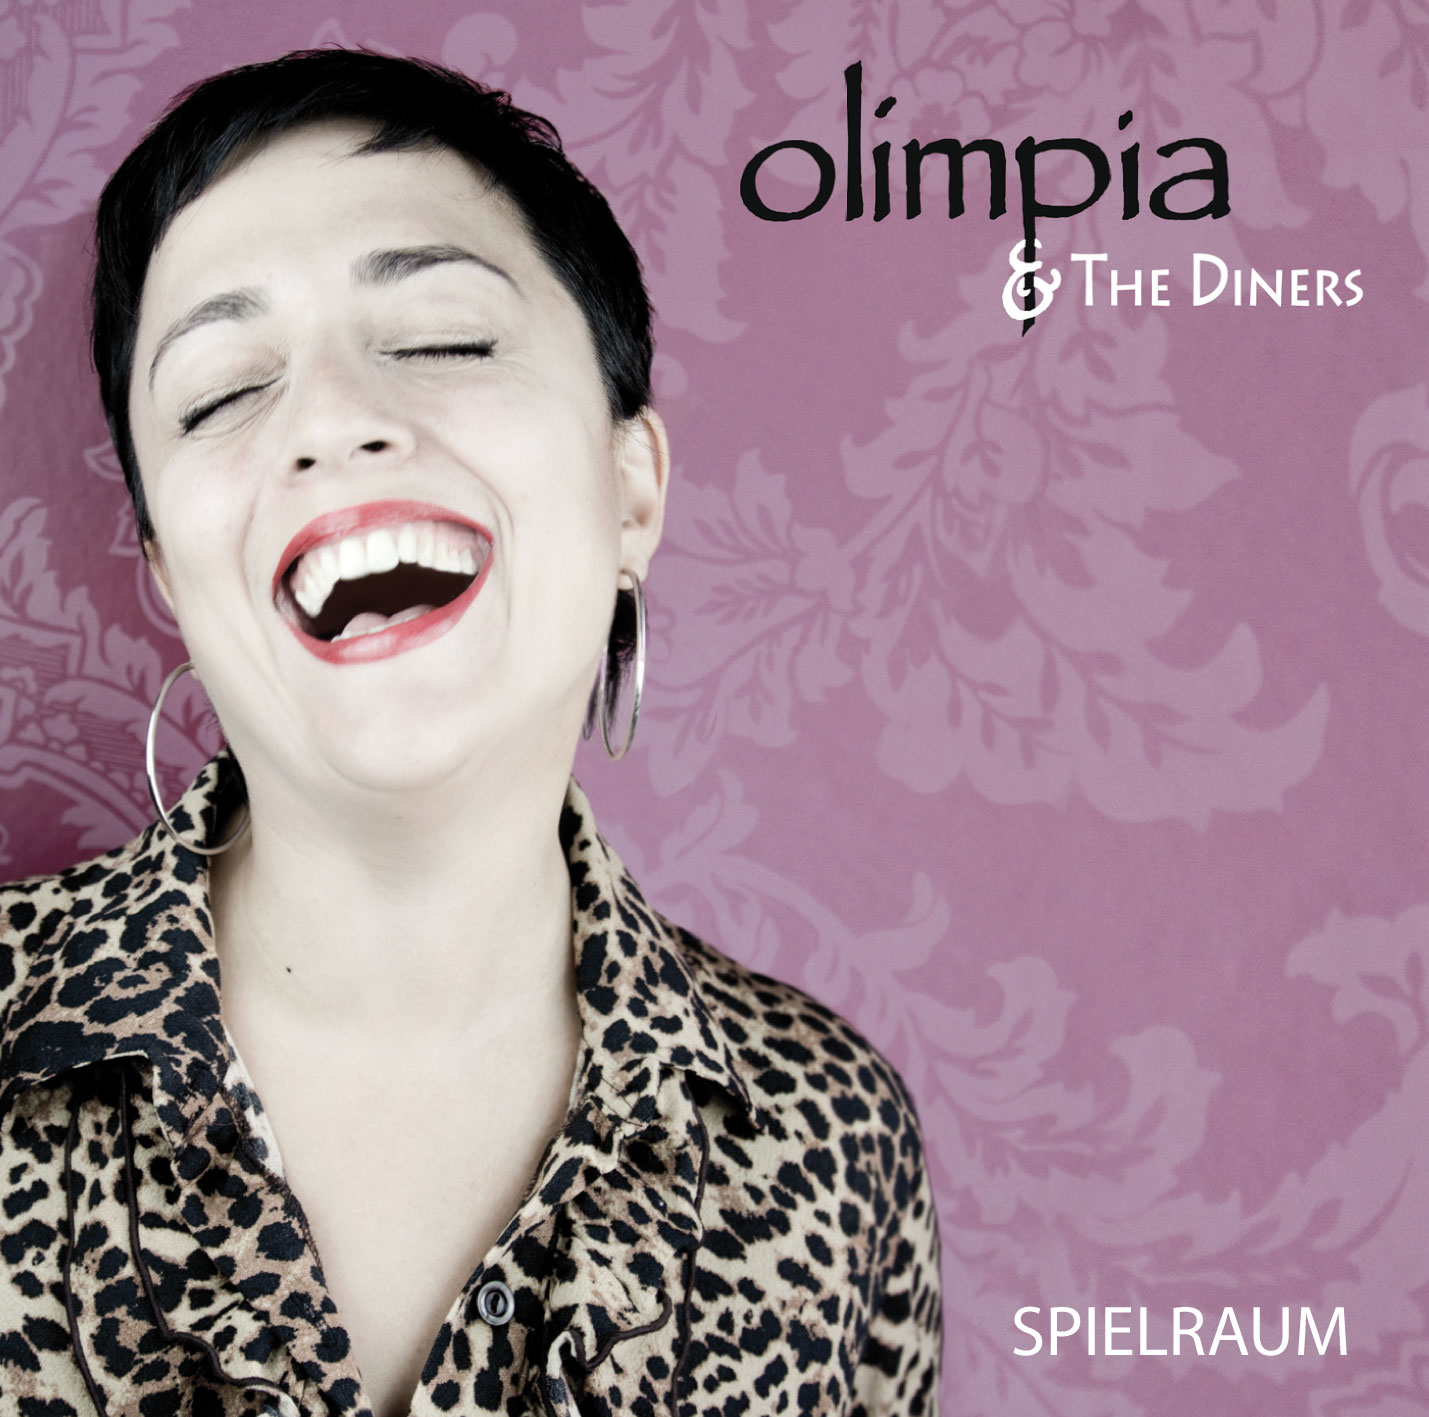 [Olimpia & The Diners]